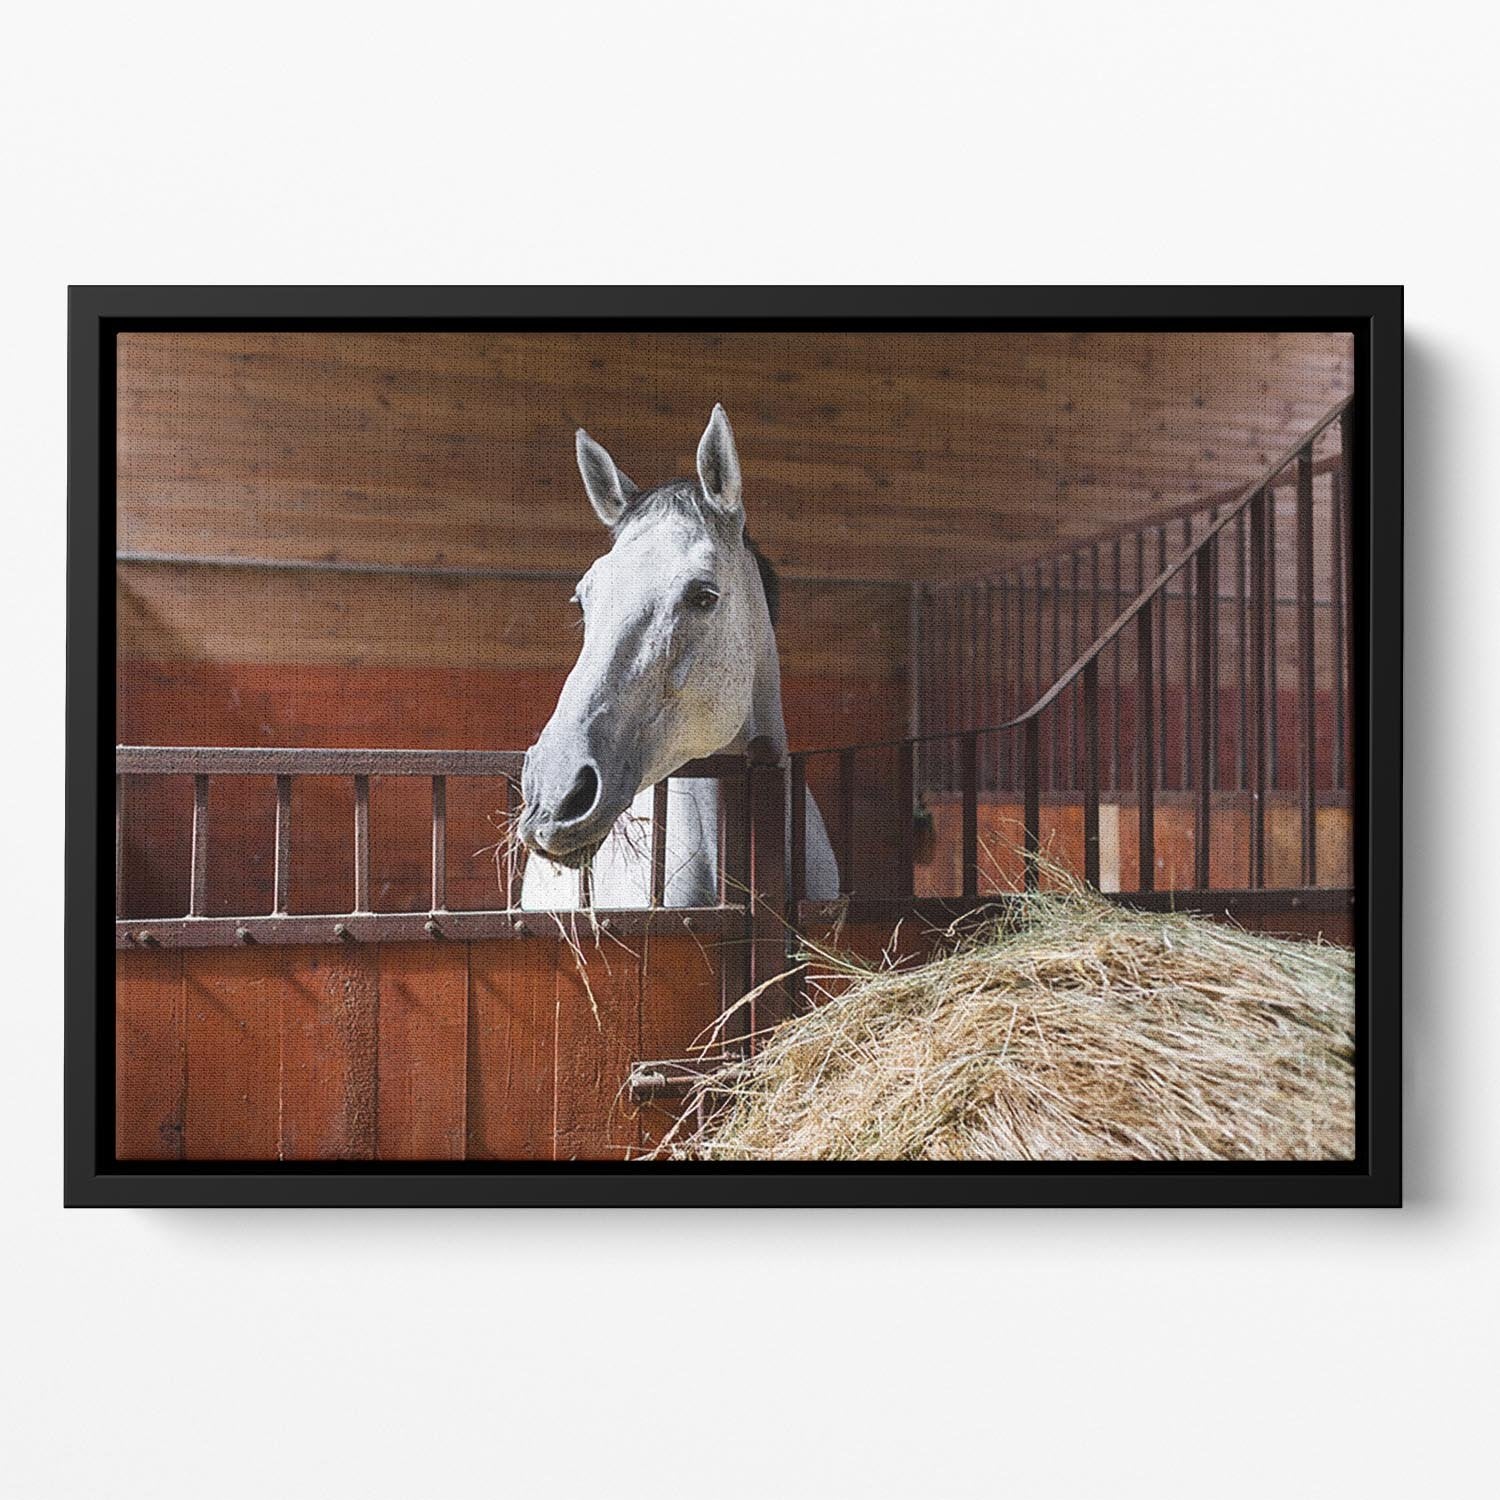 White horse eating hay in the stable Floating Framed Canvas - Canvas Art Rocks - 2